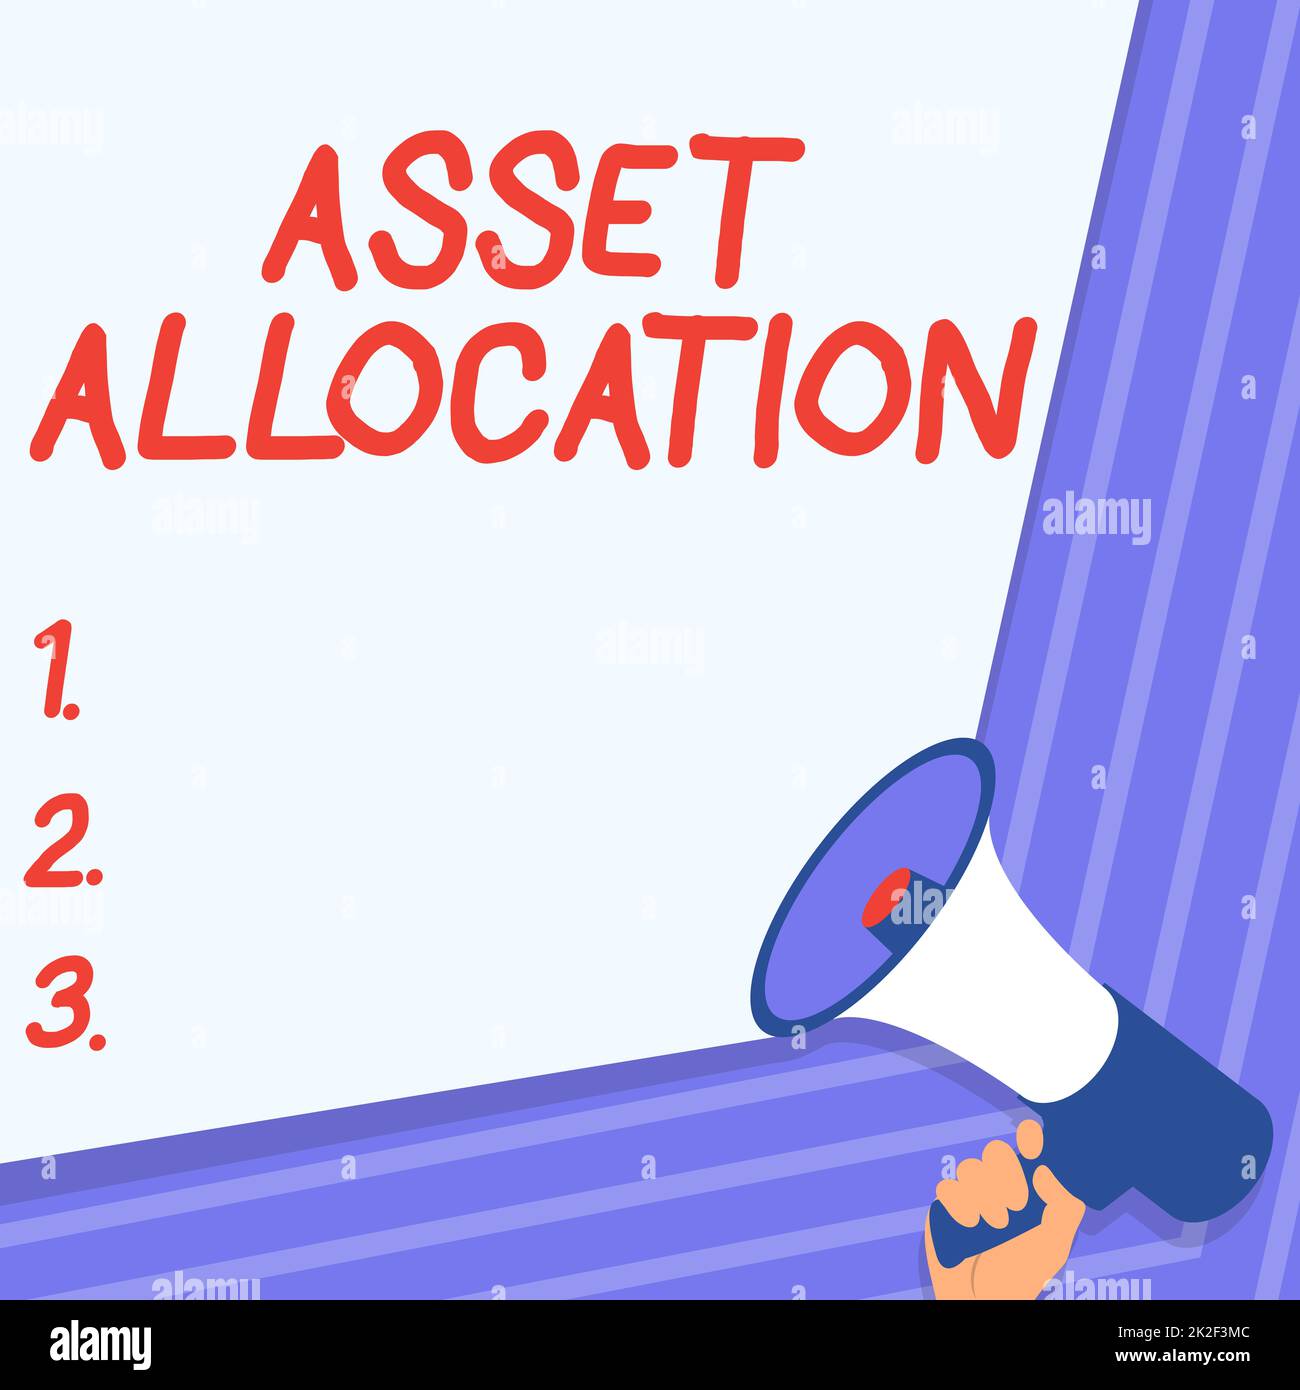 Sign displaying Asset Allocation. Business idea proportion and implementation strategy to gain advantage Illustration Of Hand Holding Megaphone Making Wonderfull Announcement. Stock Photo